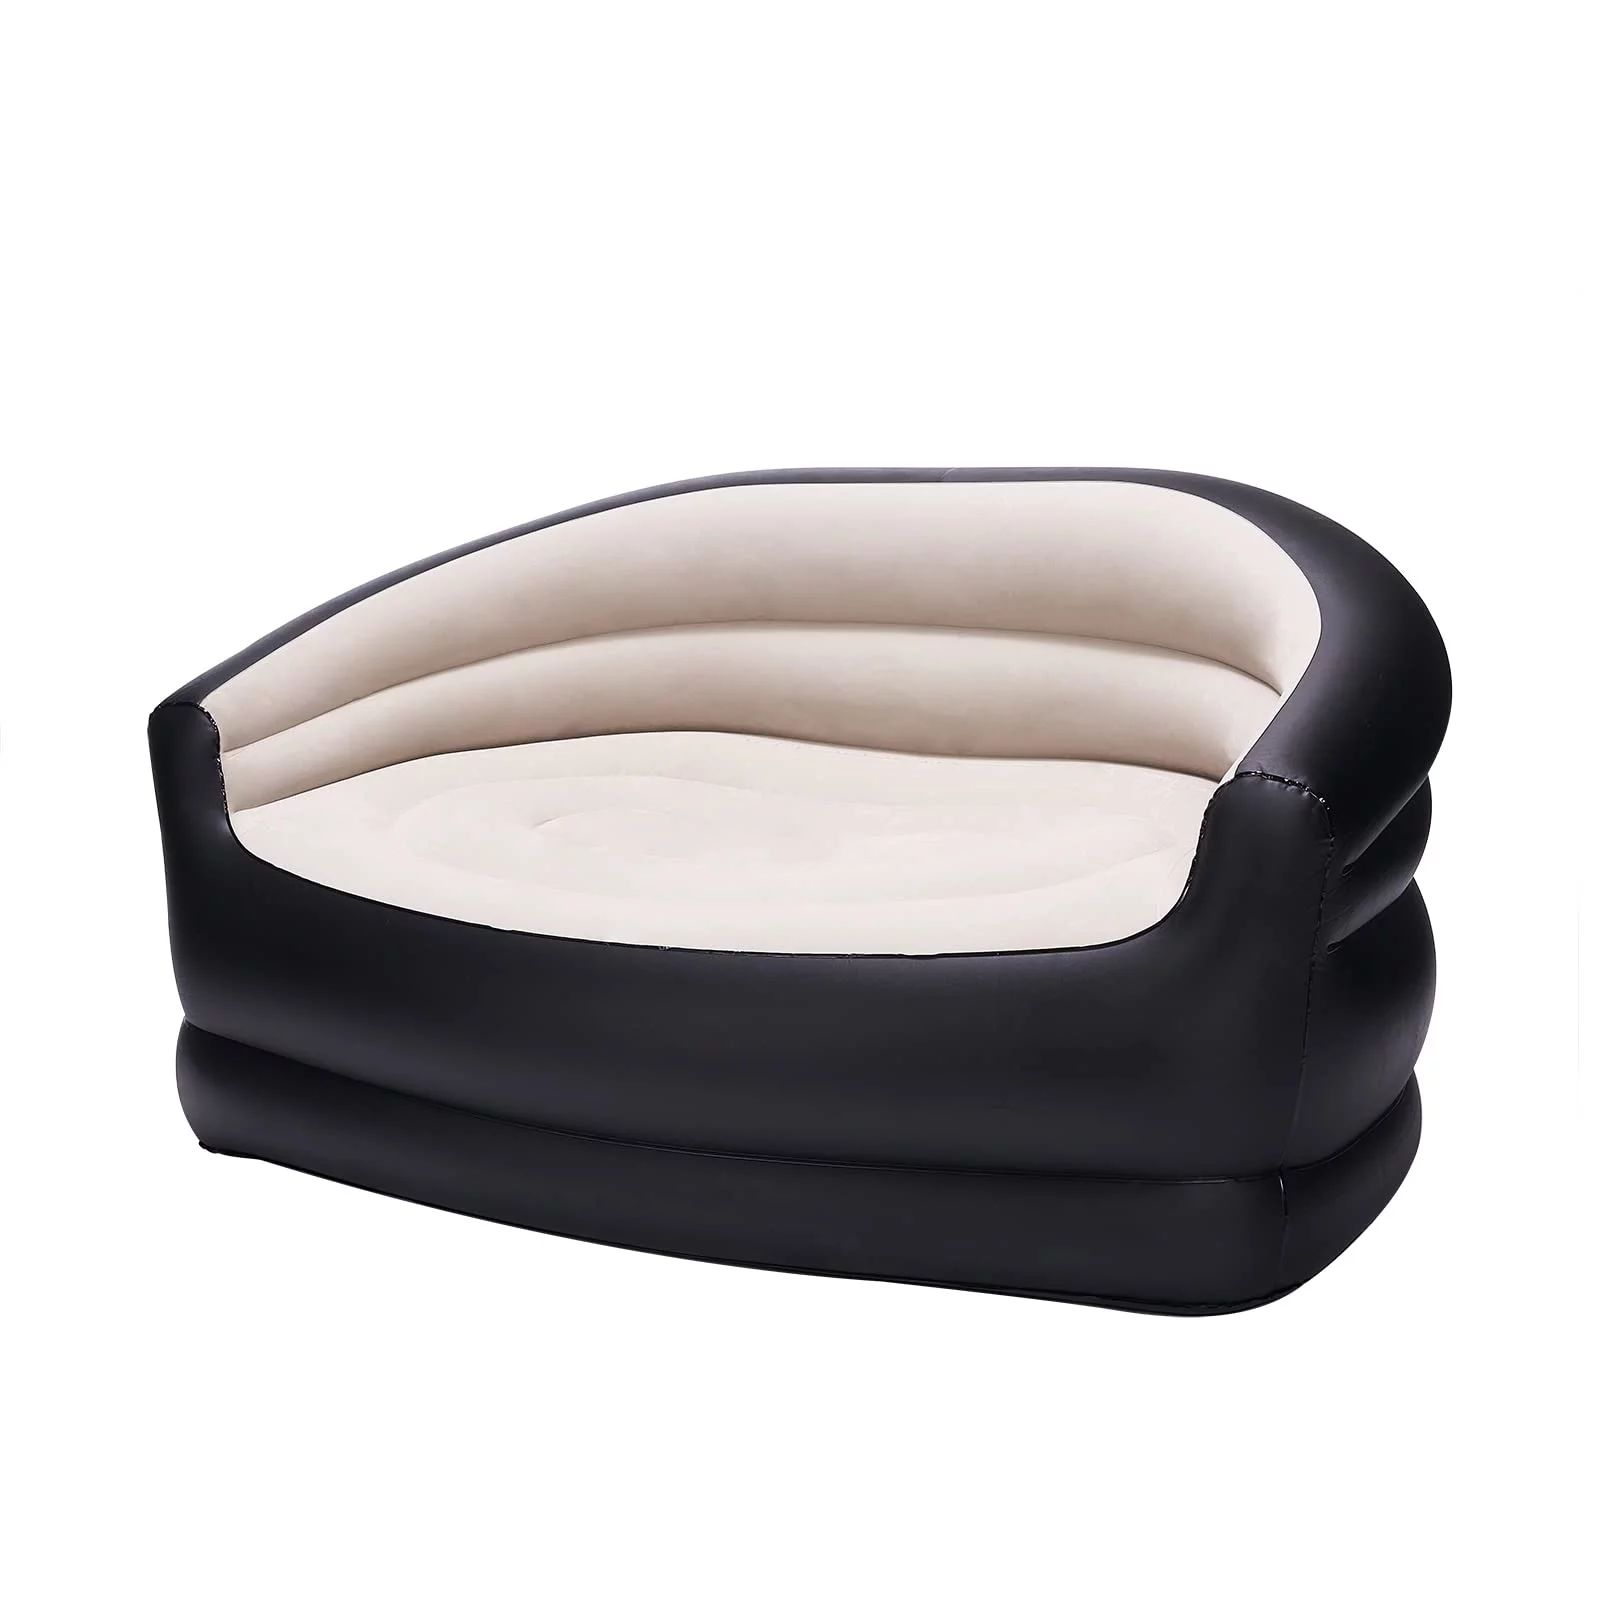 Avenli Inflatable Sofa, Air Flocking Couch Loveseat for Outdoor Camping, Black&Beige(No Pump Incl... | Walmart (US)